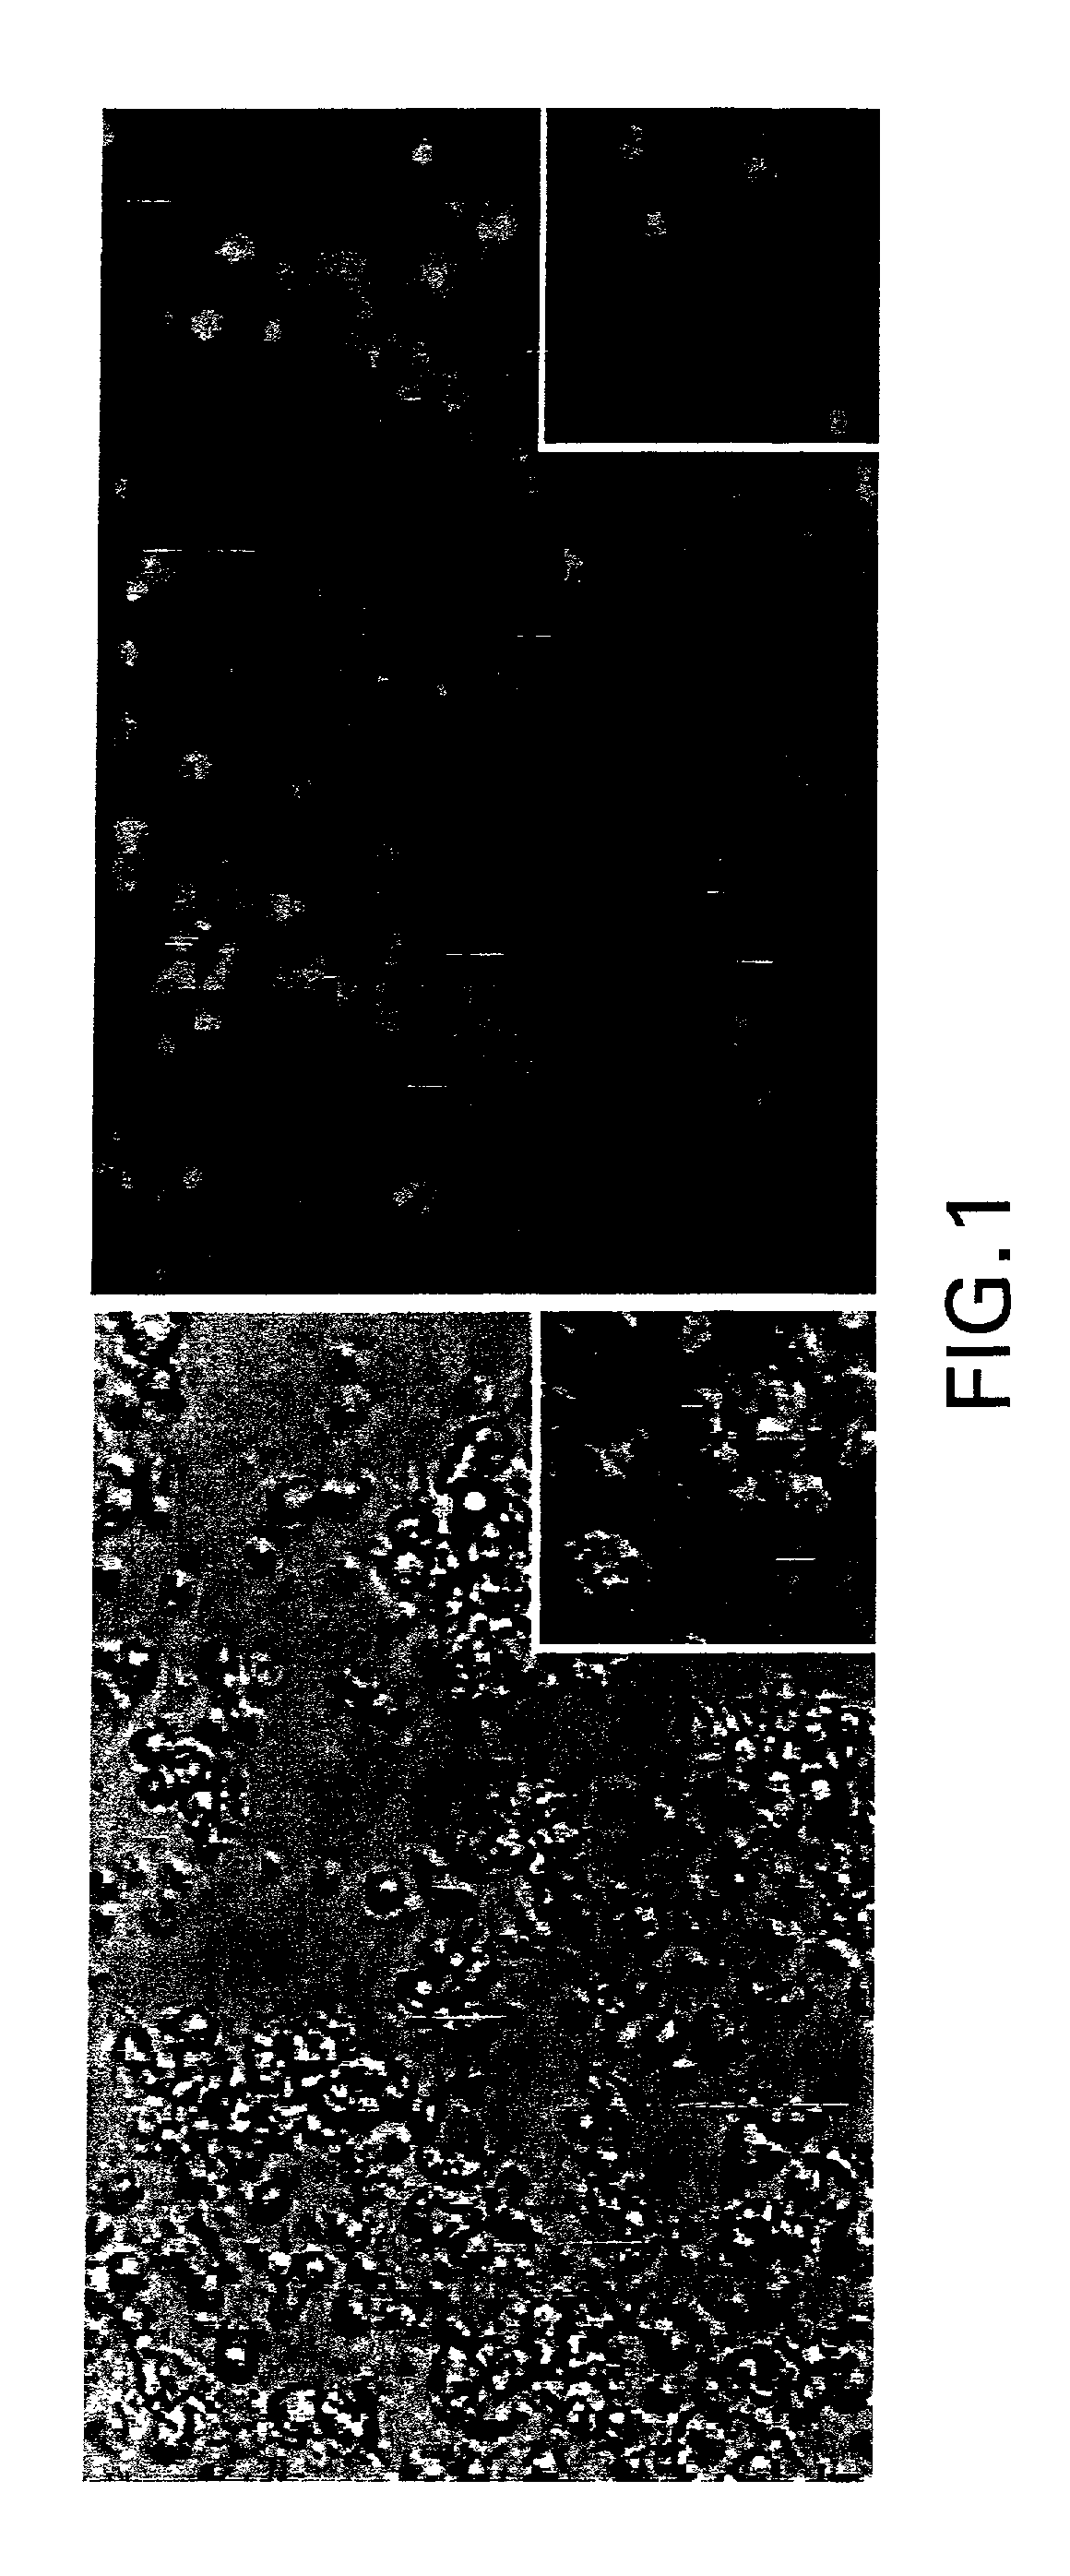 Use of tolerogenic dendritic cells for enhancing tolerogenicity in a host and methods for making the same